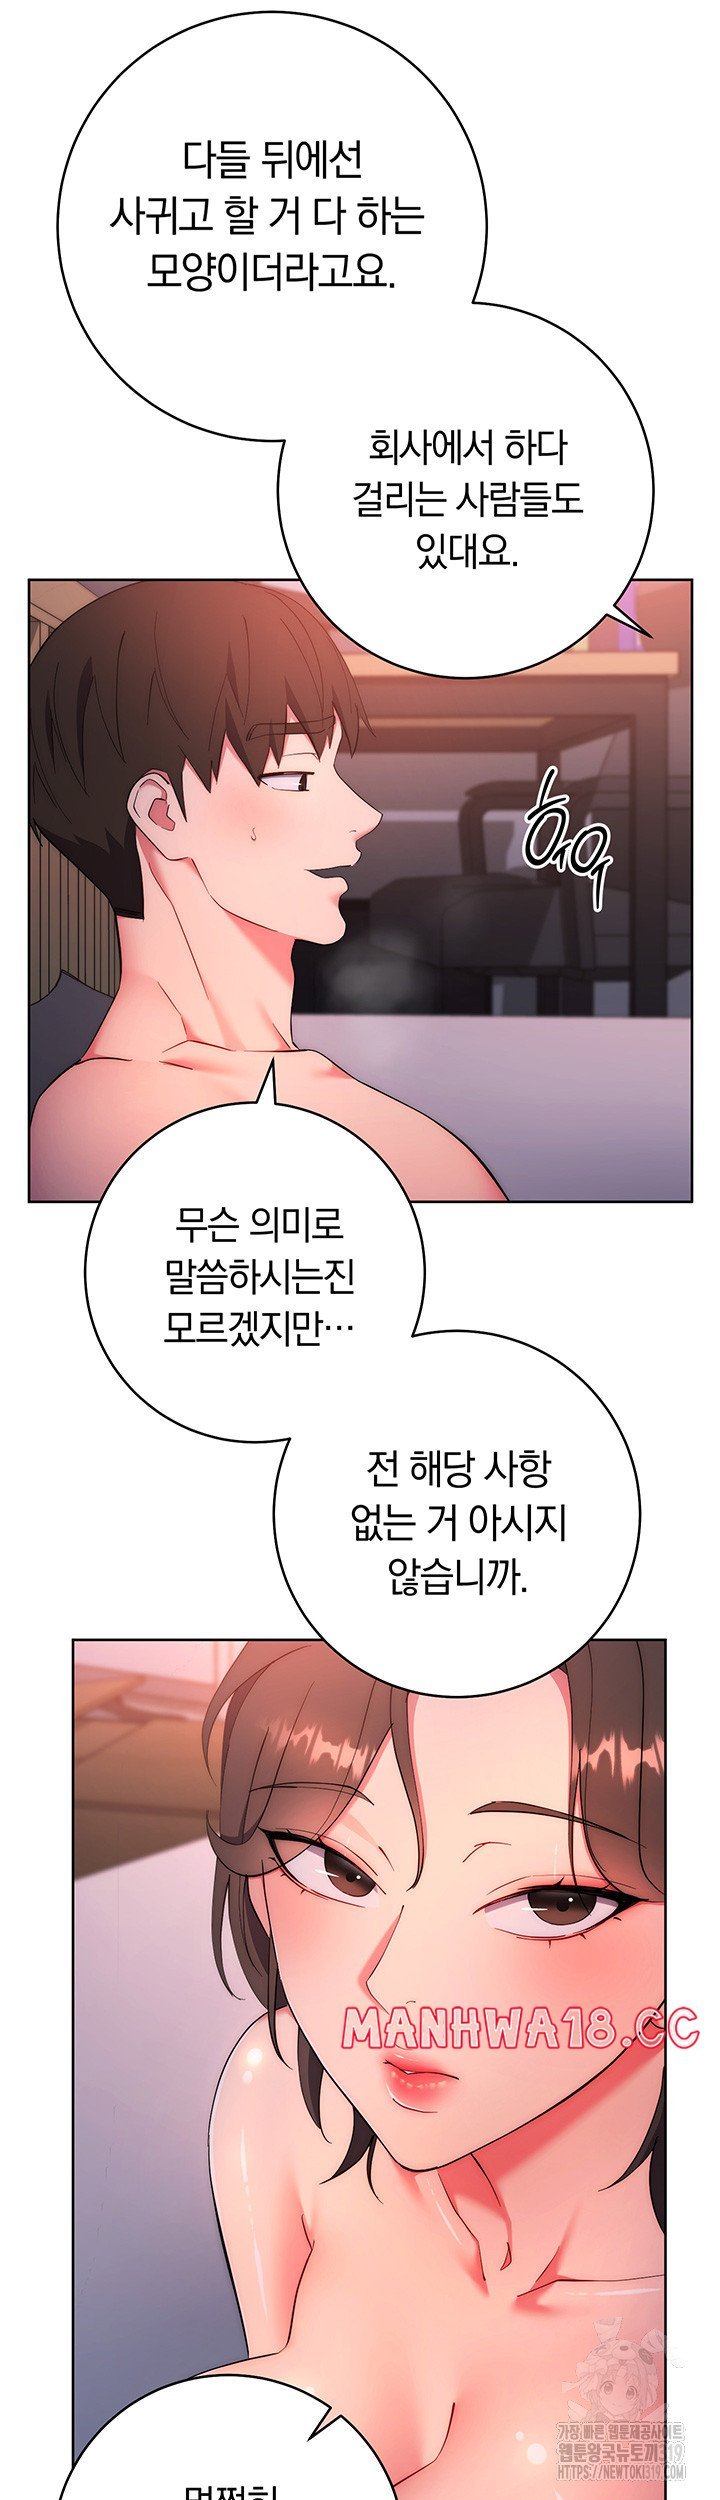 outsider-the-invisible-man-raw-chap-8-20